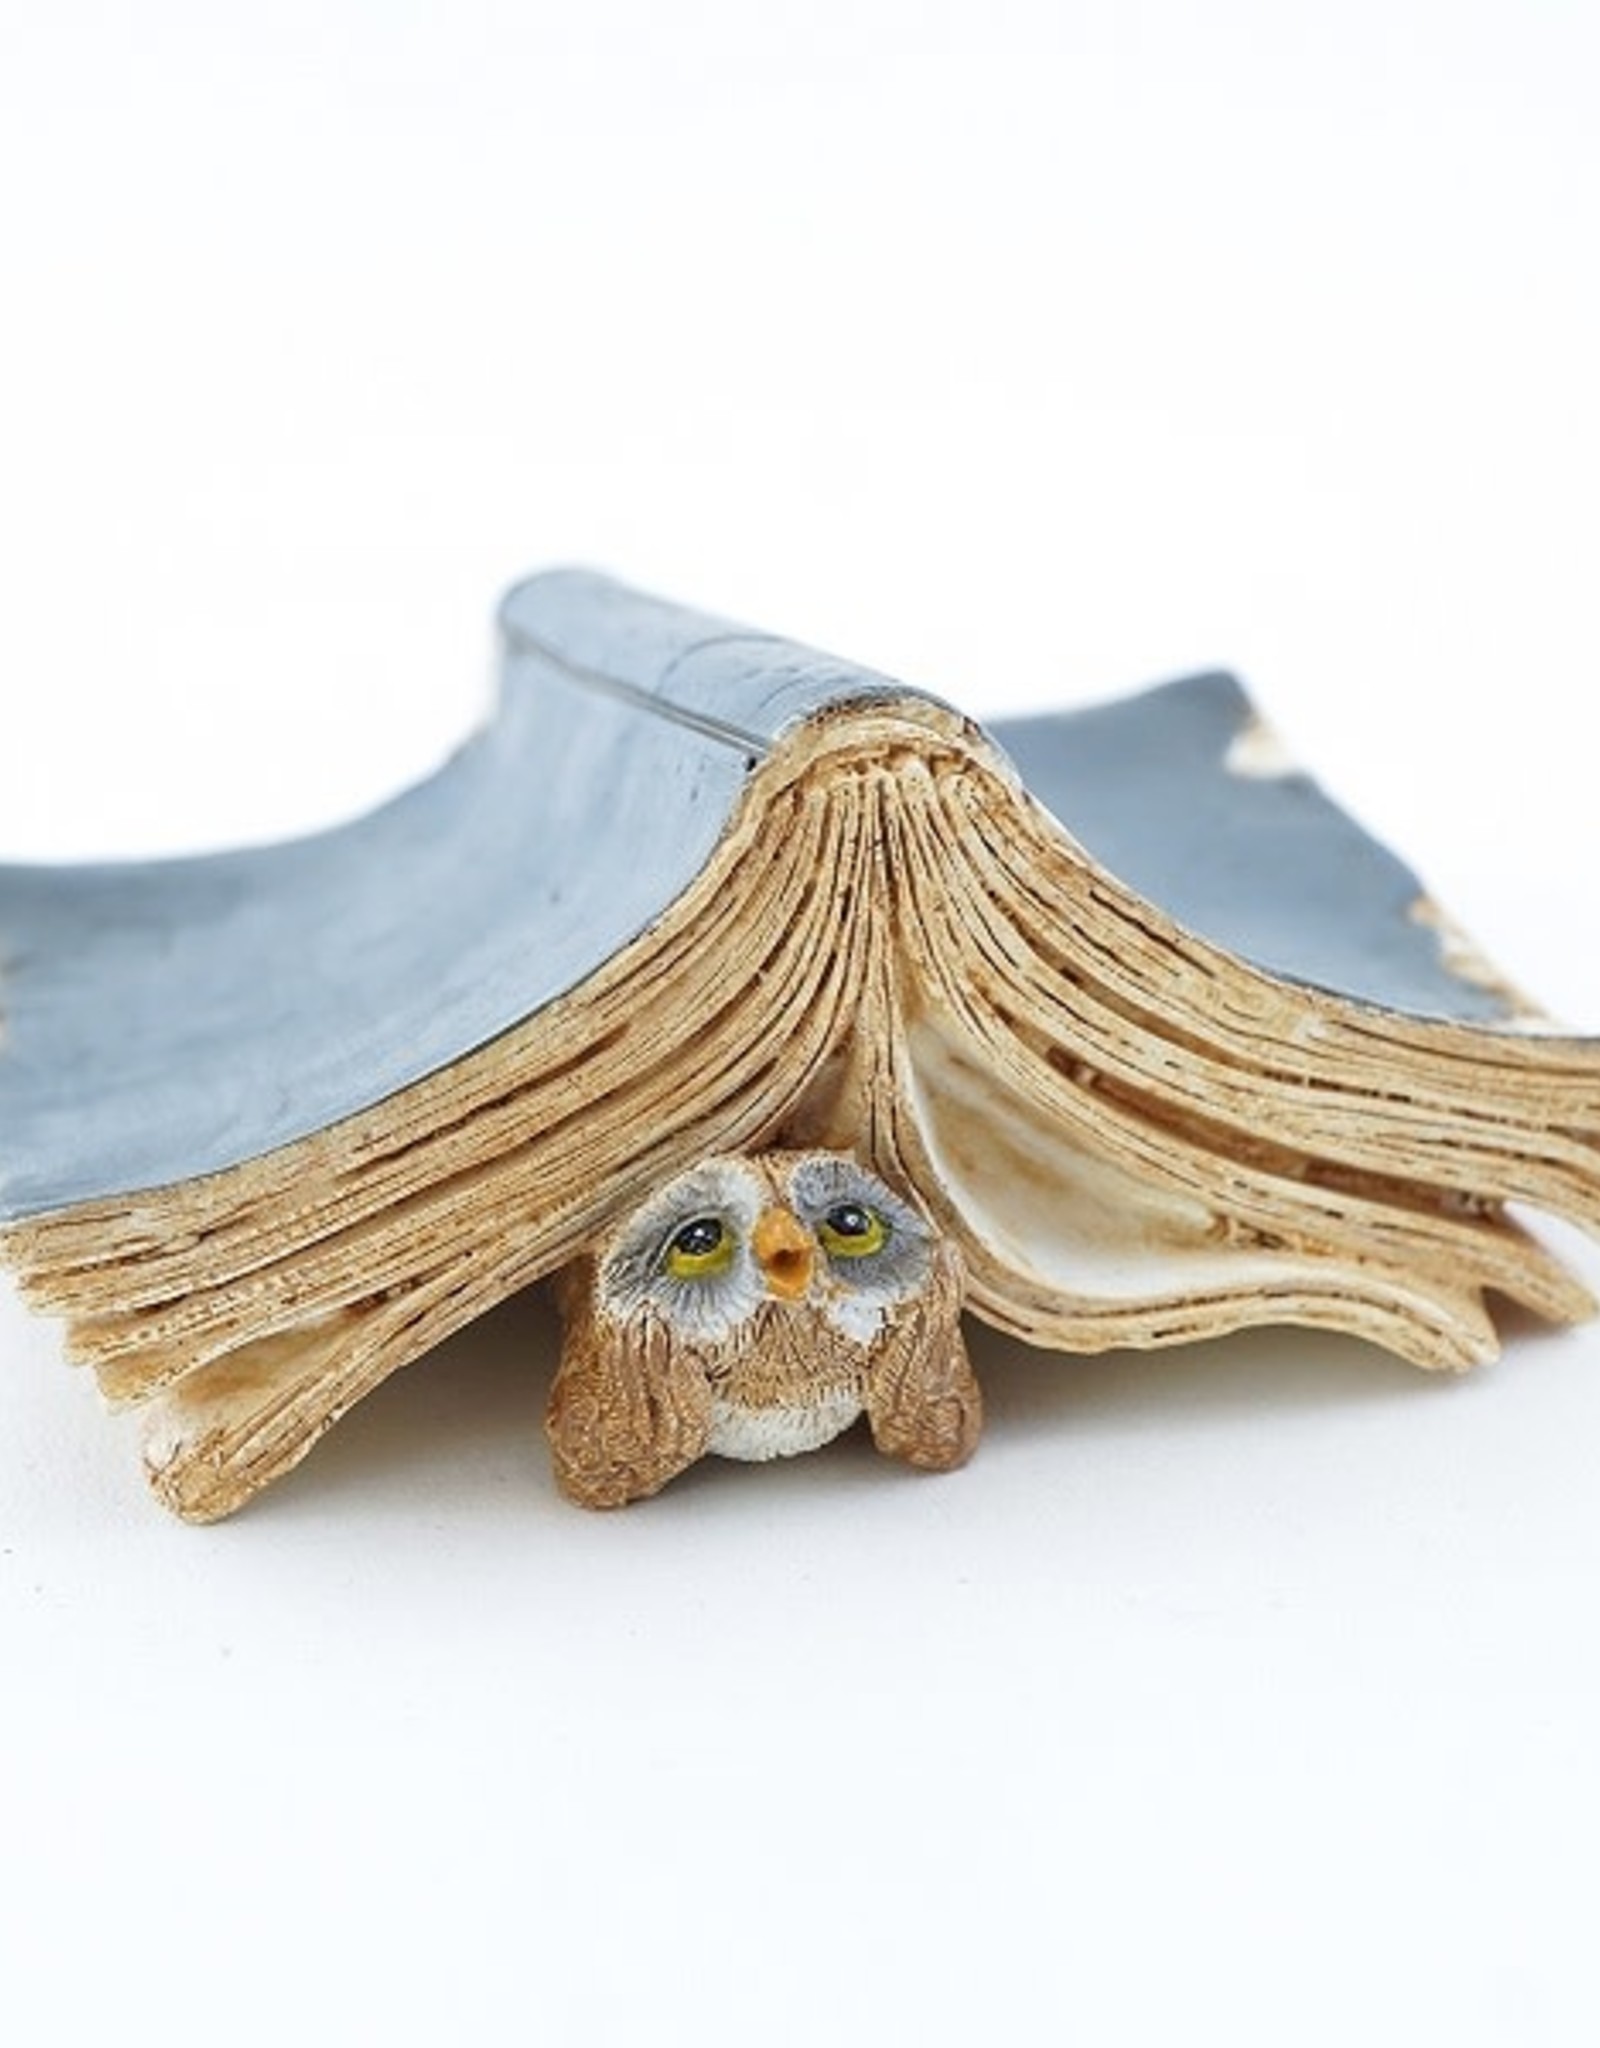 Top Land Trading OWL UNDER BOOK